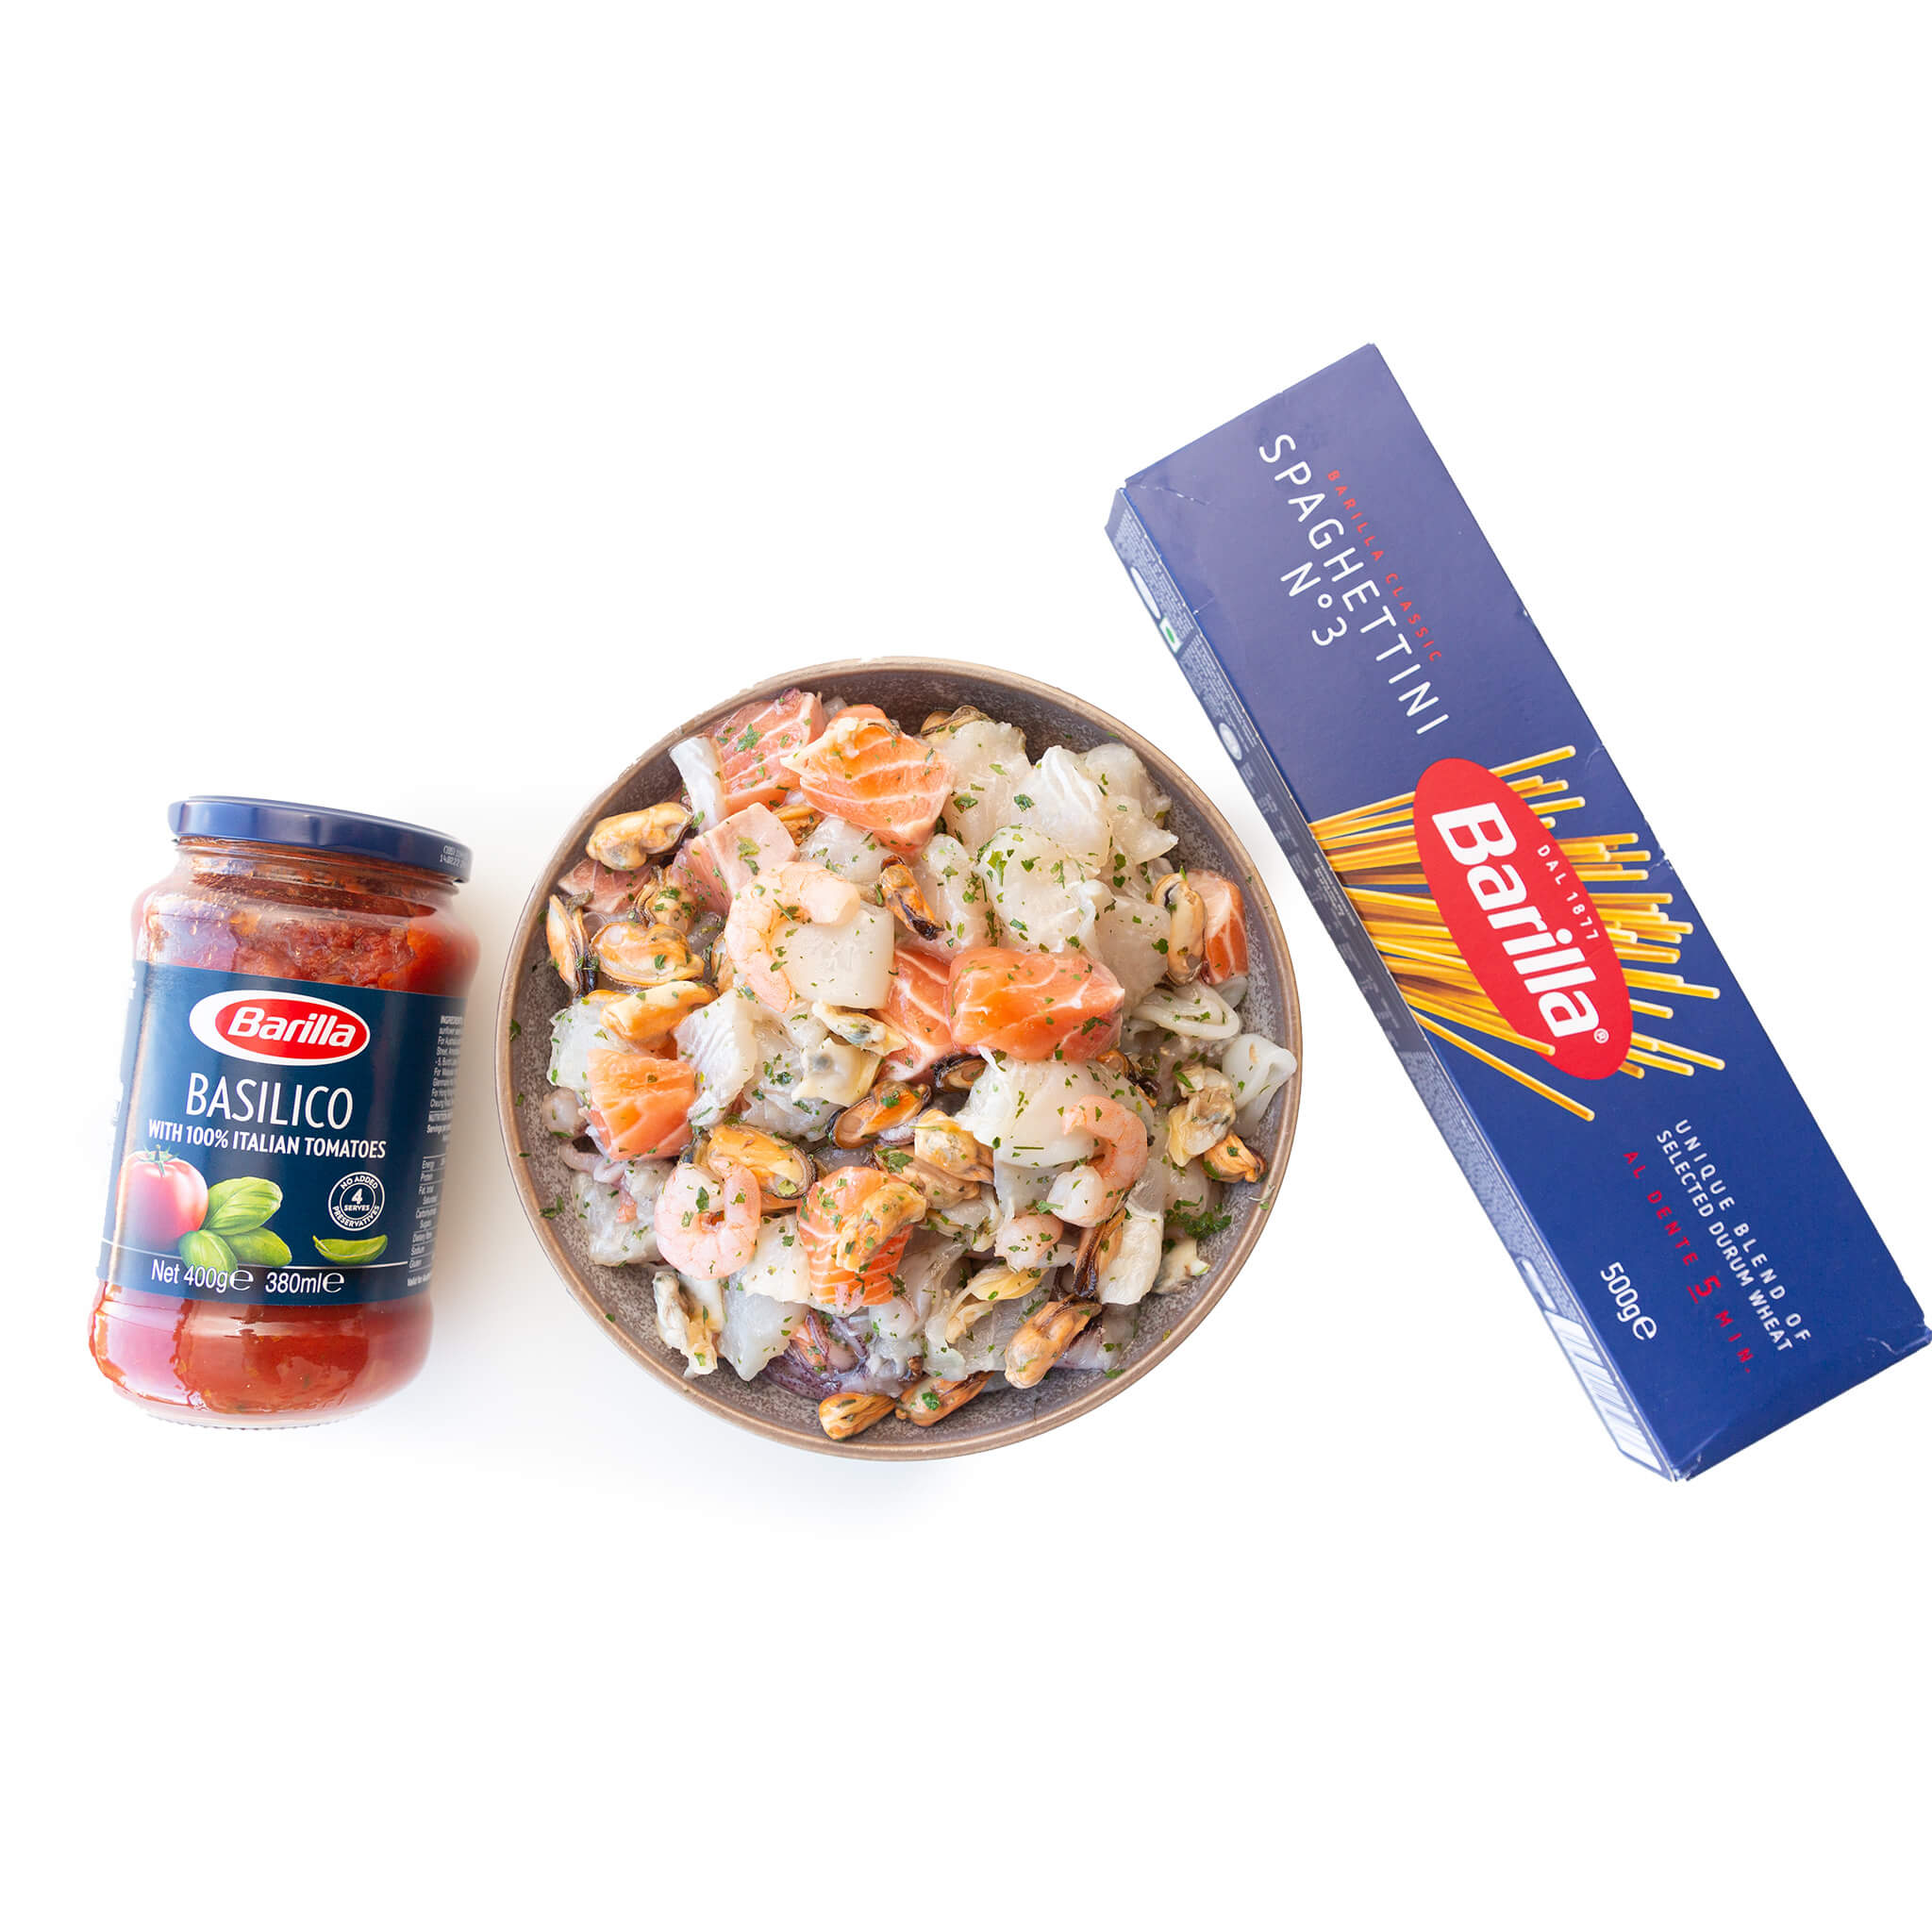 Seafood spaghetti marinara 4-5 people.A delicious mix of the rich marinara mix with  juicy prawns, soft calamari bits, and delicate pieces of fresh fish. , with Barilla Spagehetti,  and Basilico sauce available at steve costi seafood